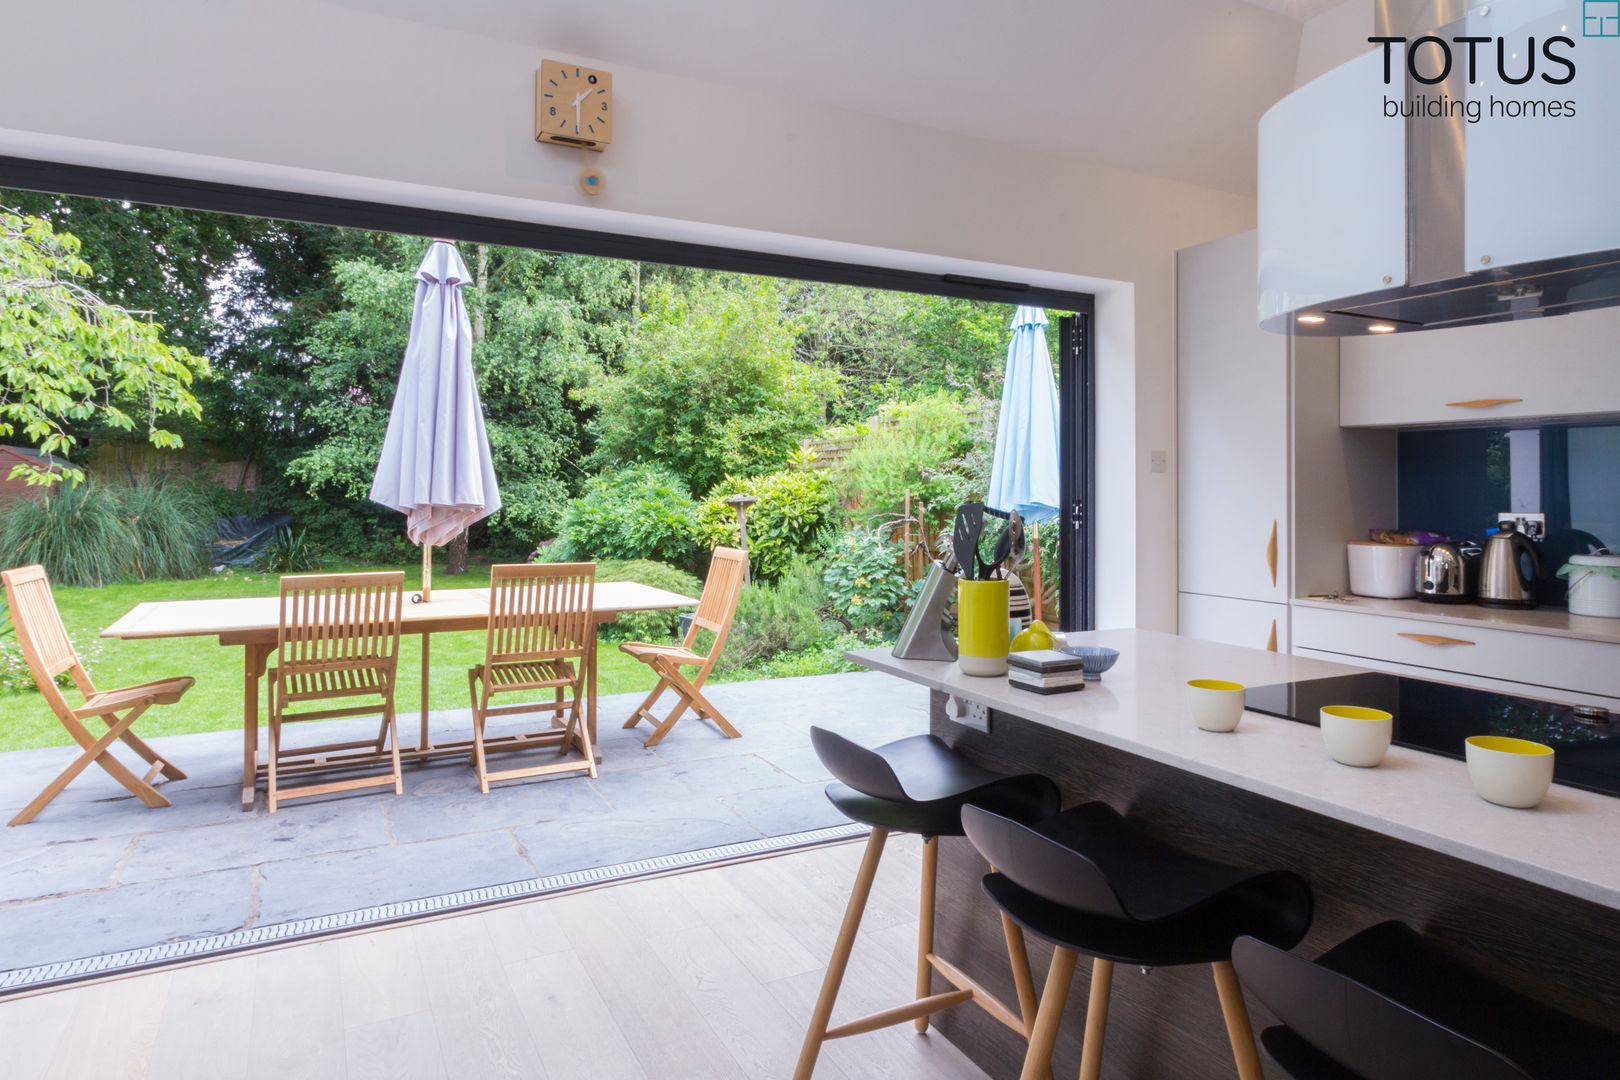 New life for a 1920s home - extension and full renovation, Thames Ditton, Surrey, TOTUS TOTUS Nowoczesna kuchnia